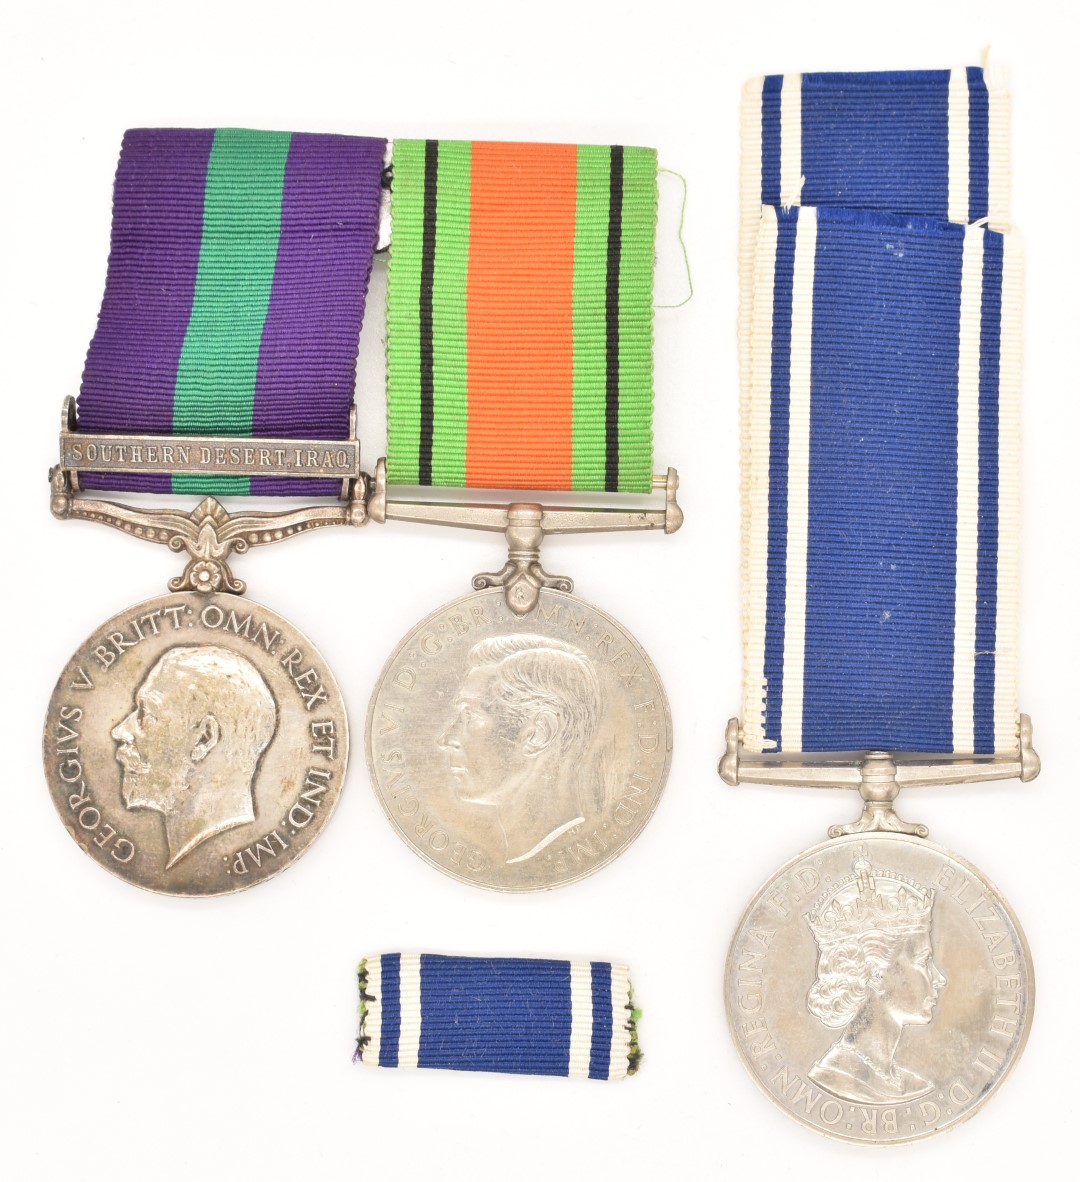 Royal Air Force King George V General Service Medal with clasp for Southern Desert Iraq, named to